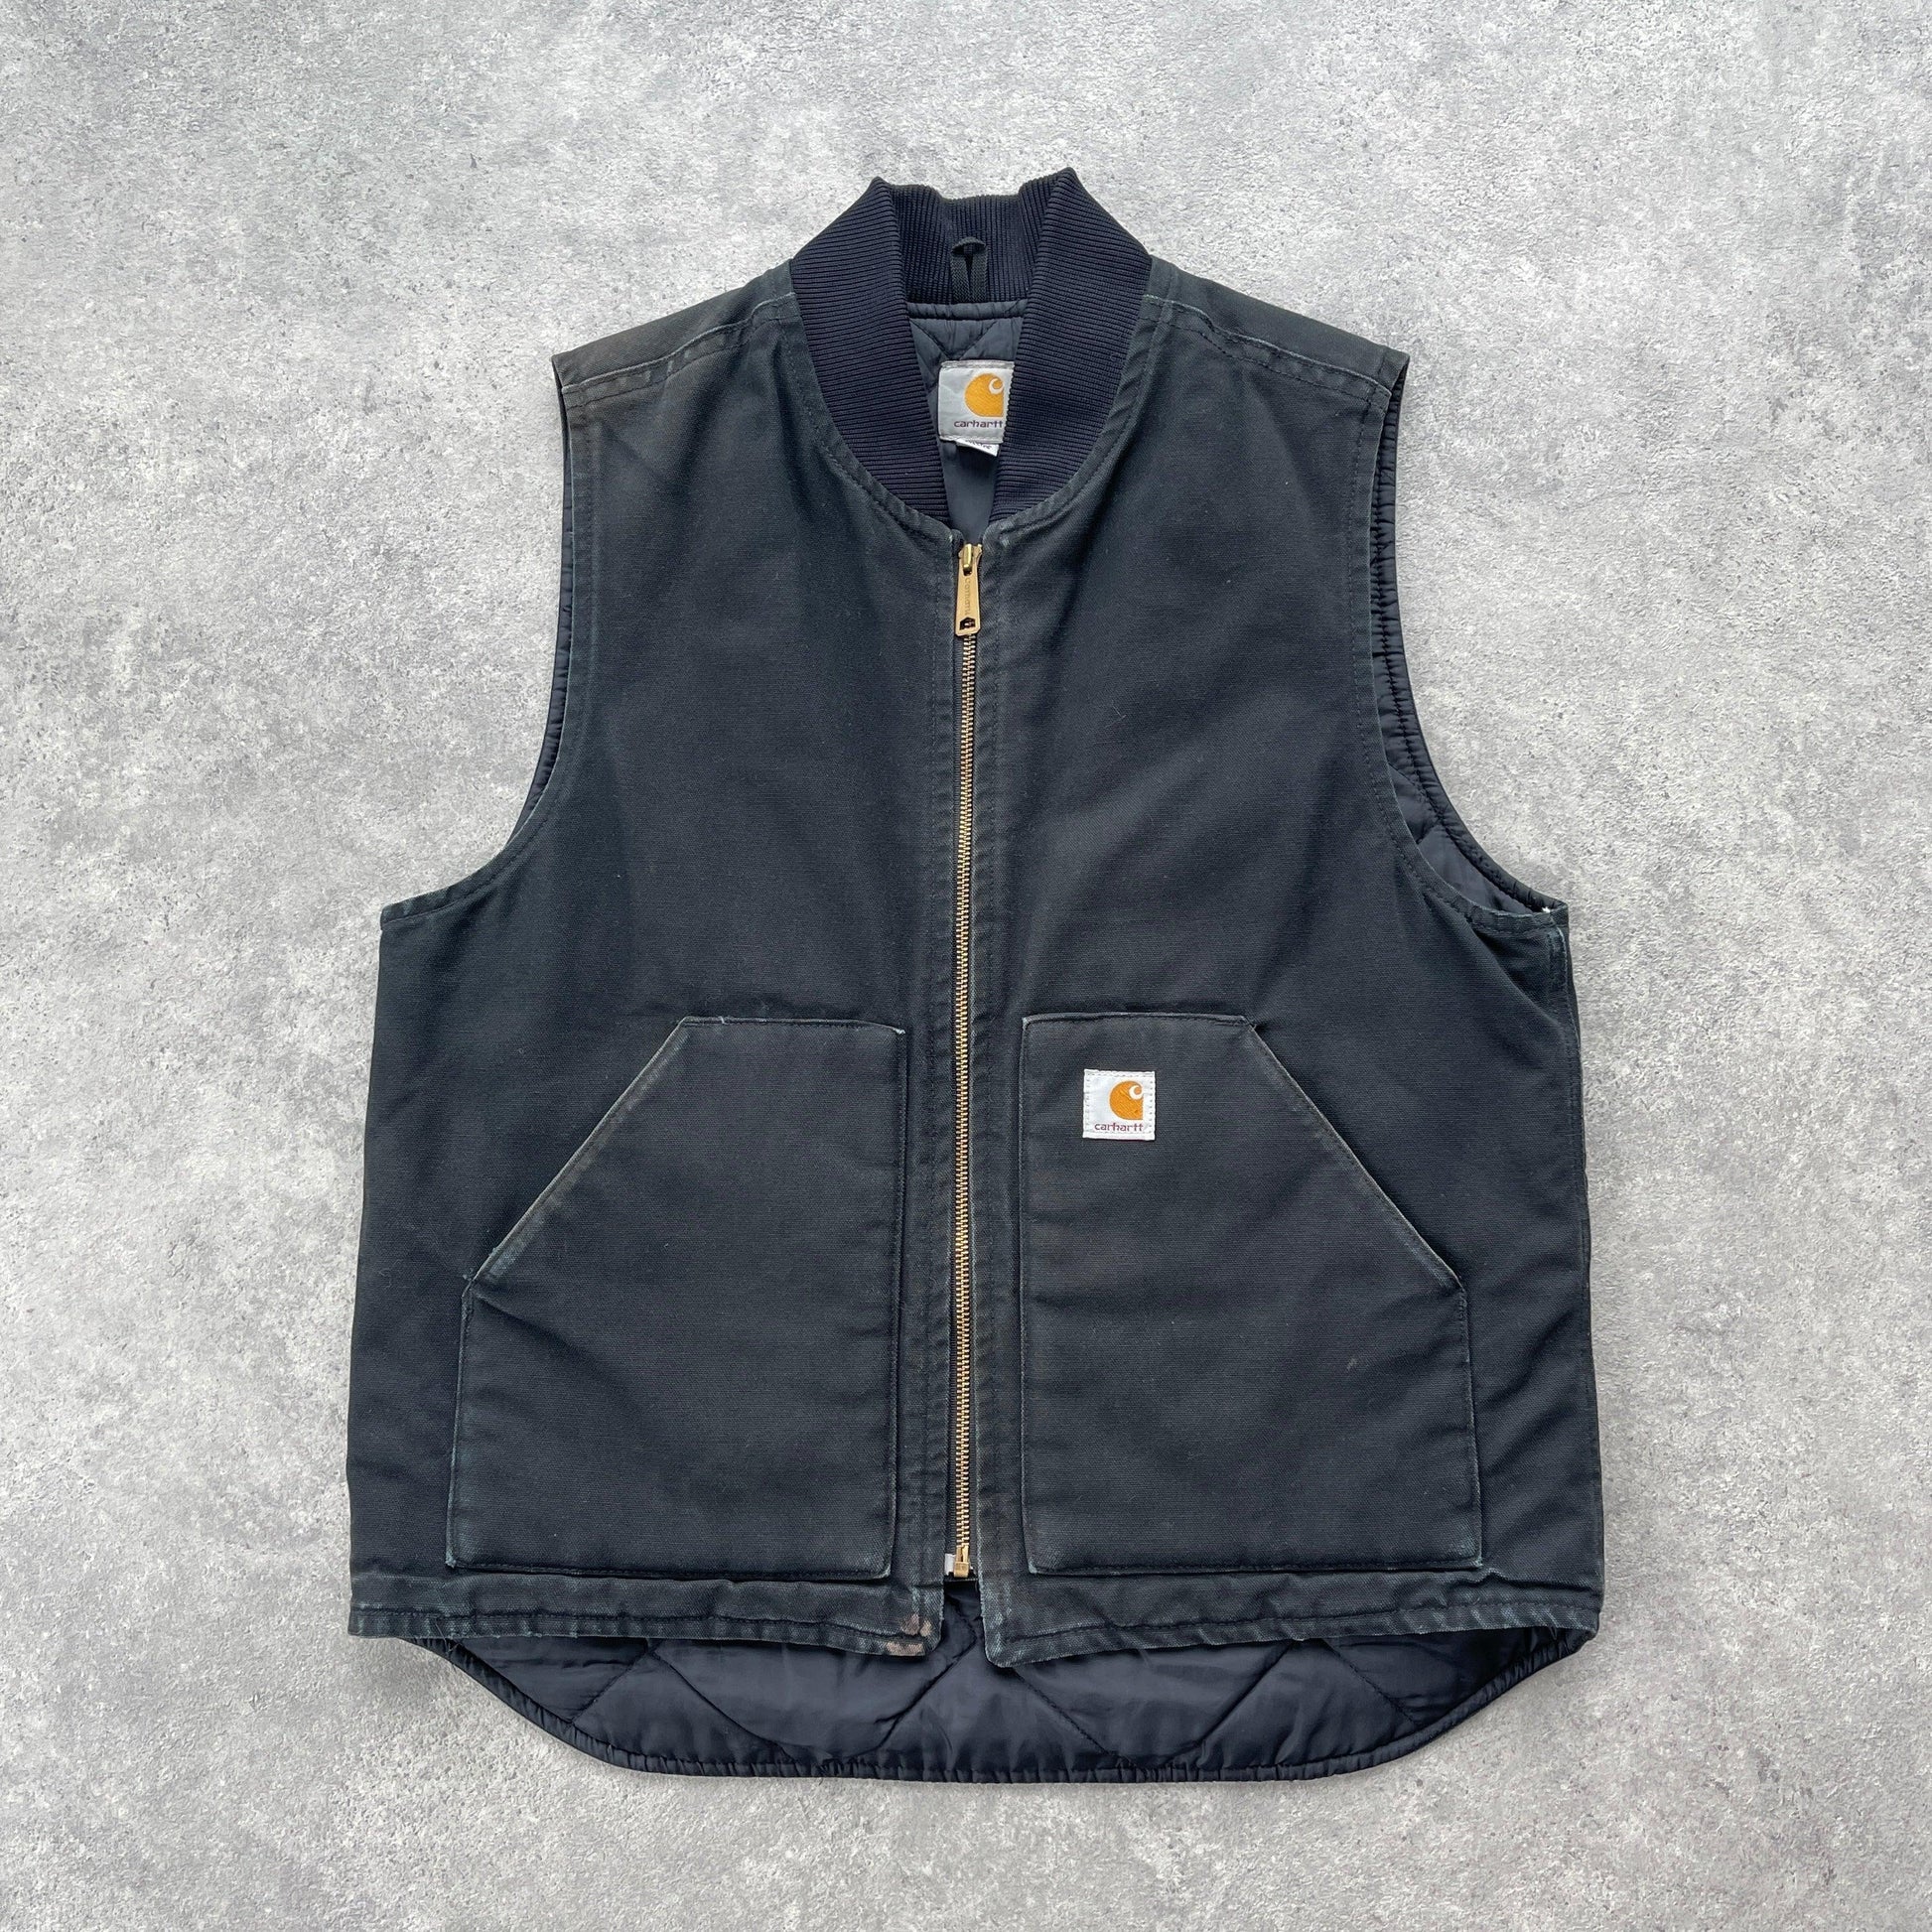 Carhartt 2013 heavyweight quilted vest jacket (M) - Known Source